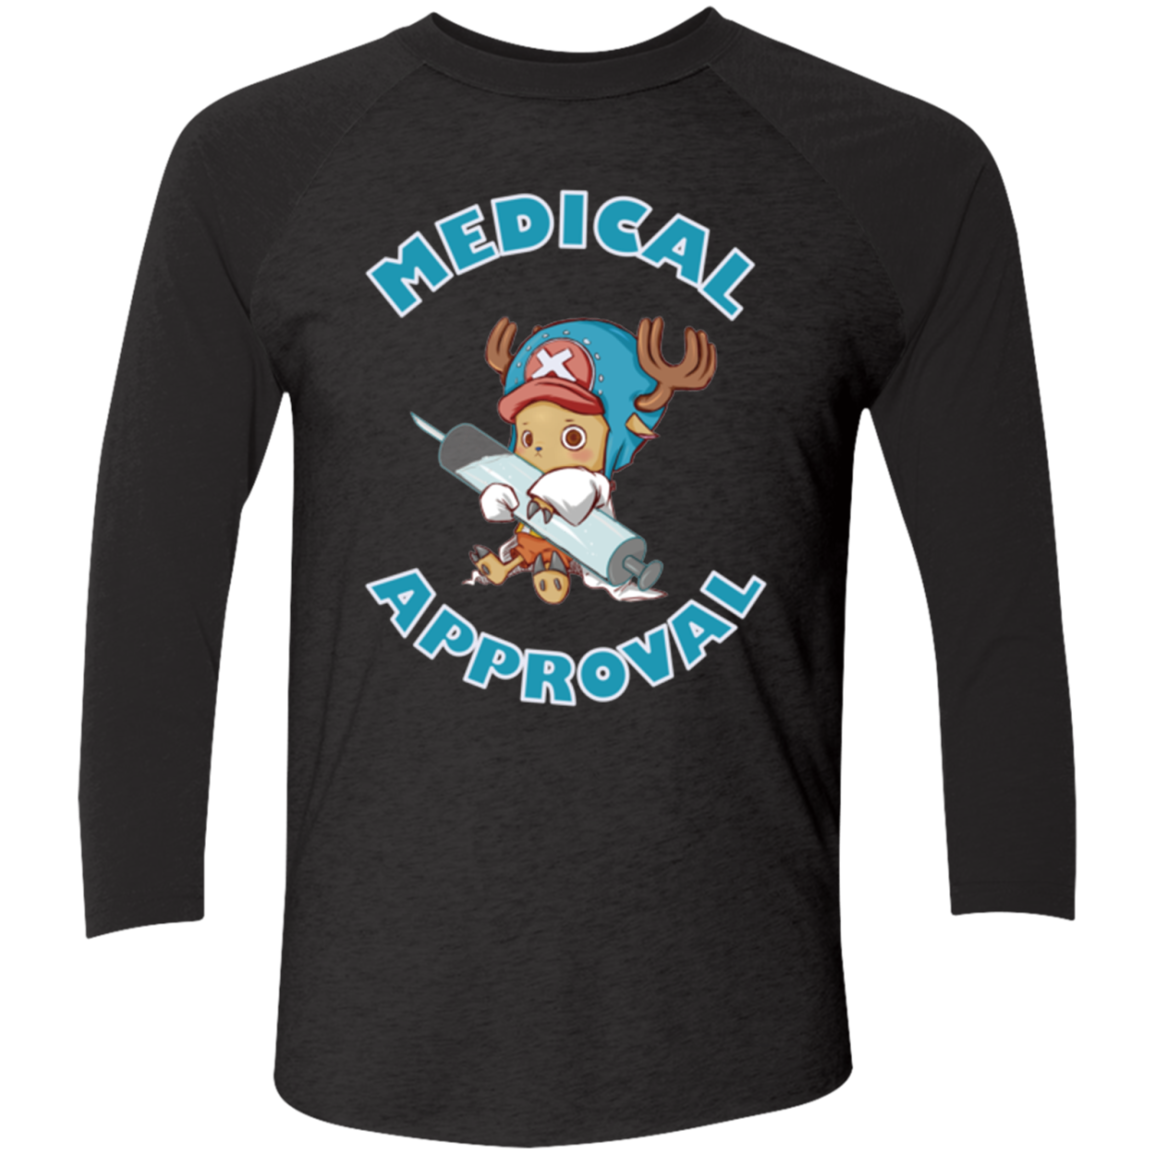 Medical approval Triblend 3/4 Sleeve